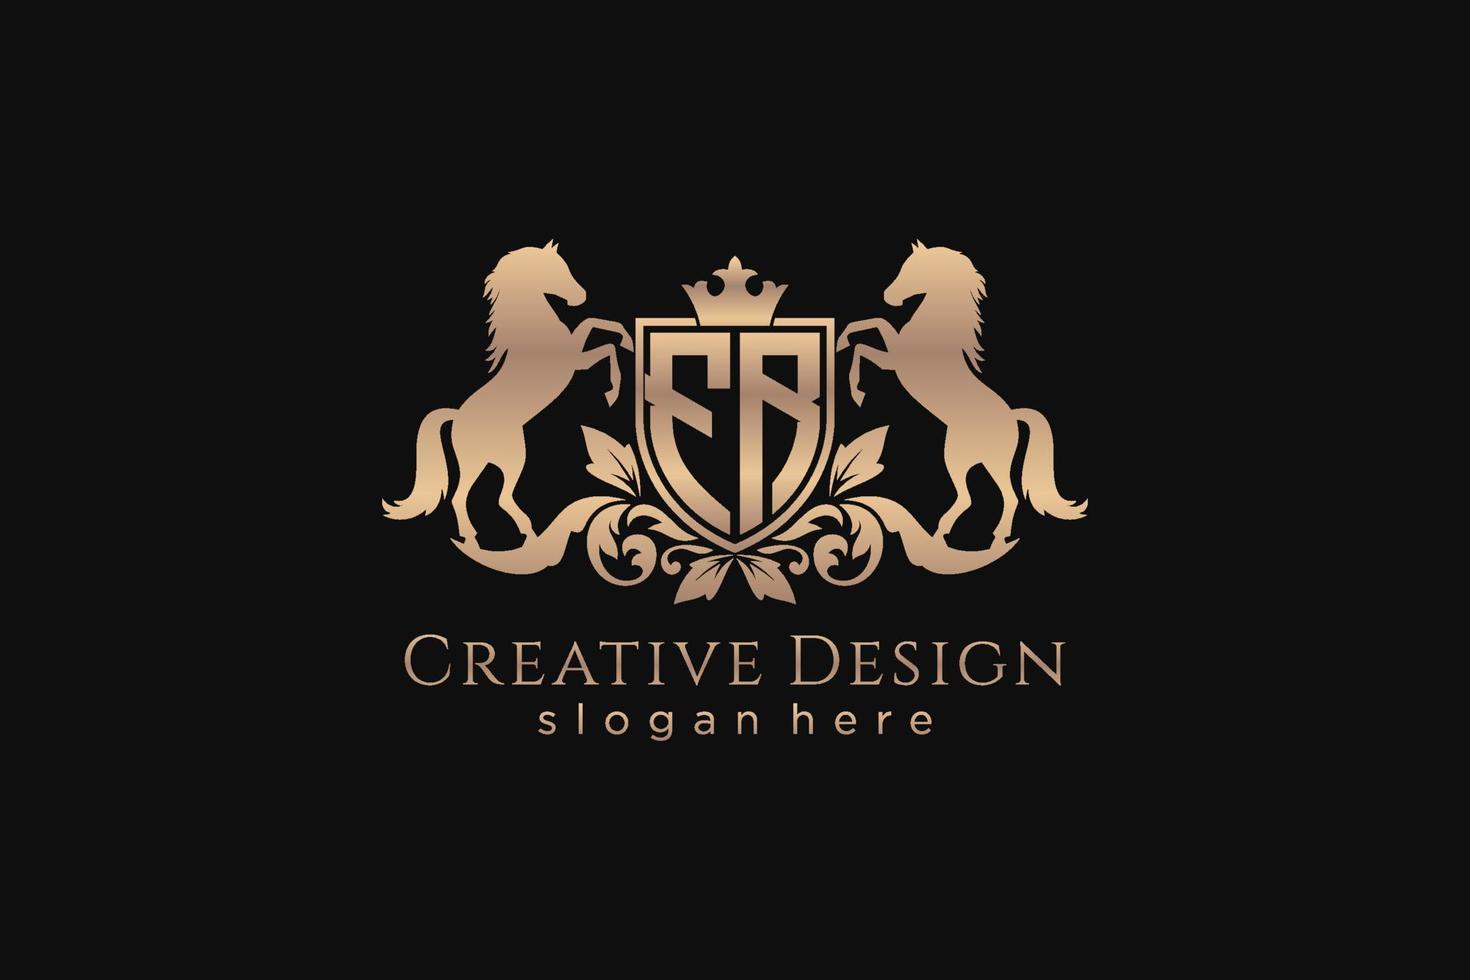 initial FR Retro golden crest with shield and two horses, badge template with scrolls and royal crown - perfect for luxurious branding projects vector